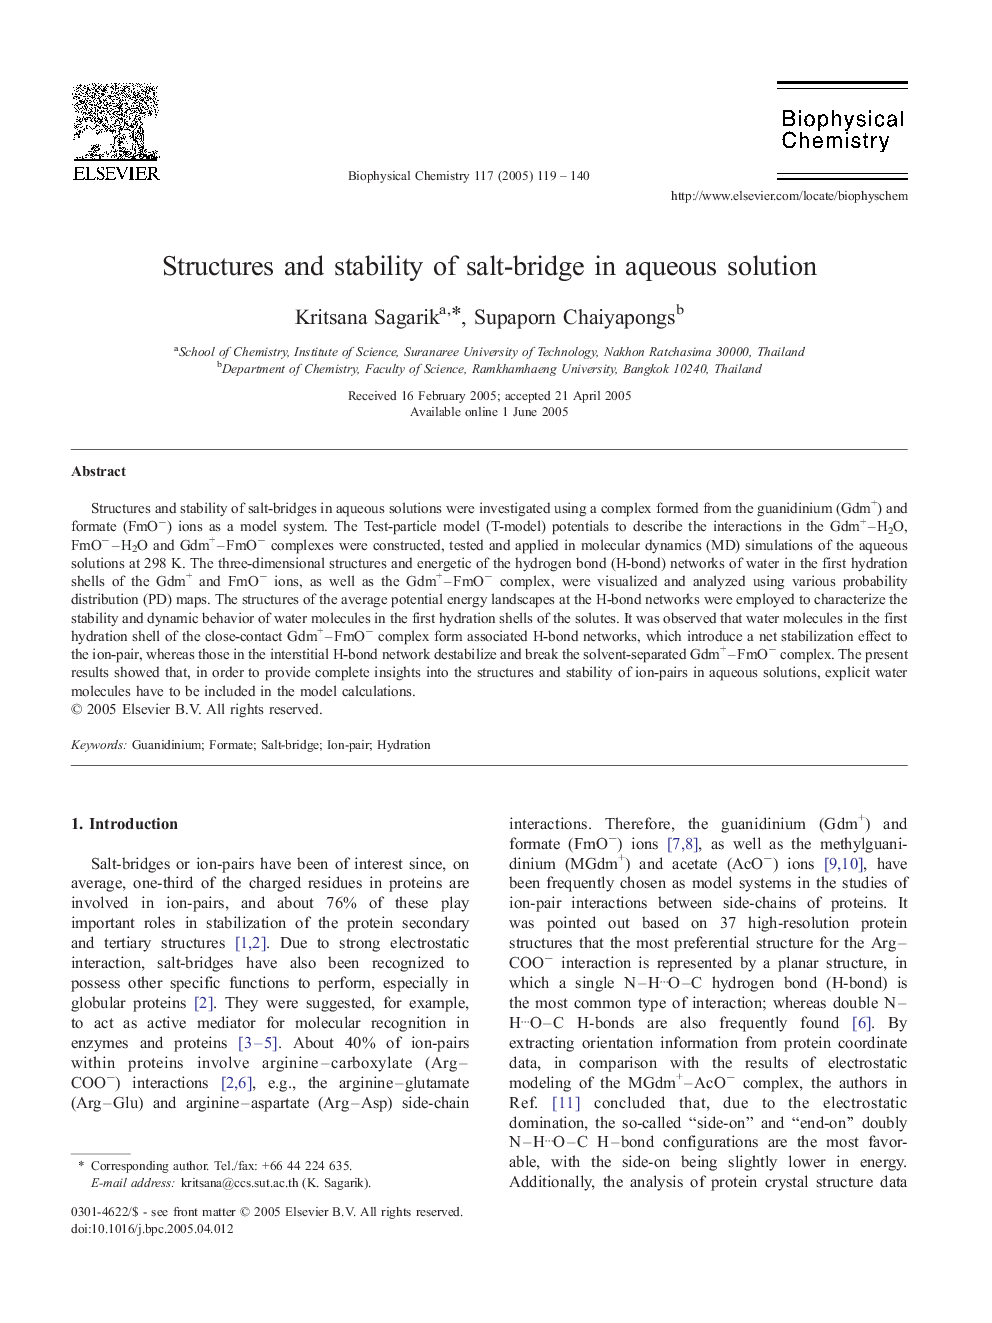 Structures and stability of salt-bridge in aqueous solution